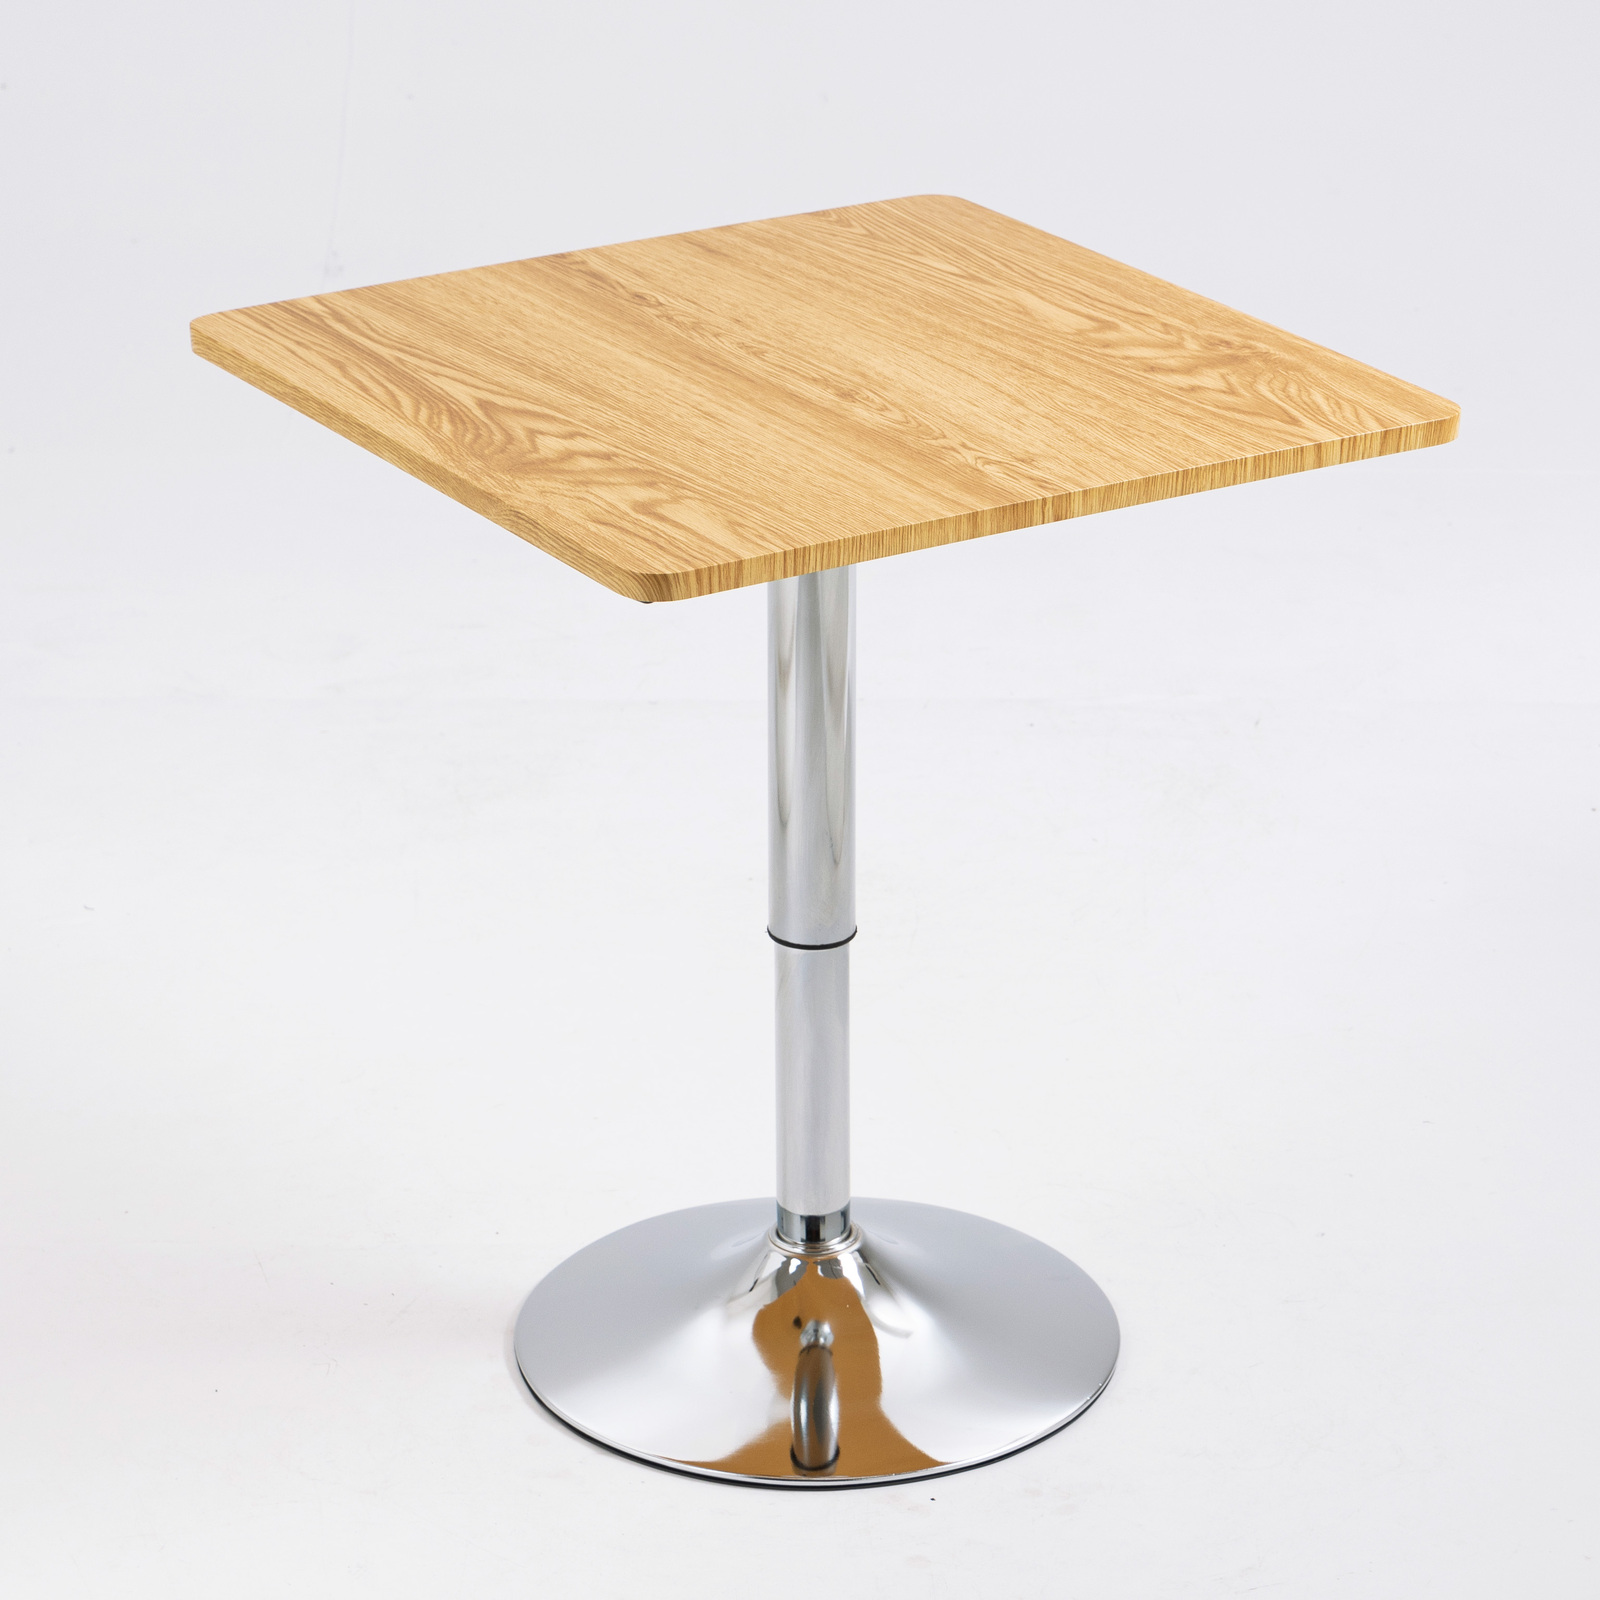 Century Designer Bar Table Height Adjustable with Gas Lift (Oak/Stainless Steel)